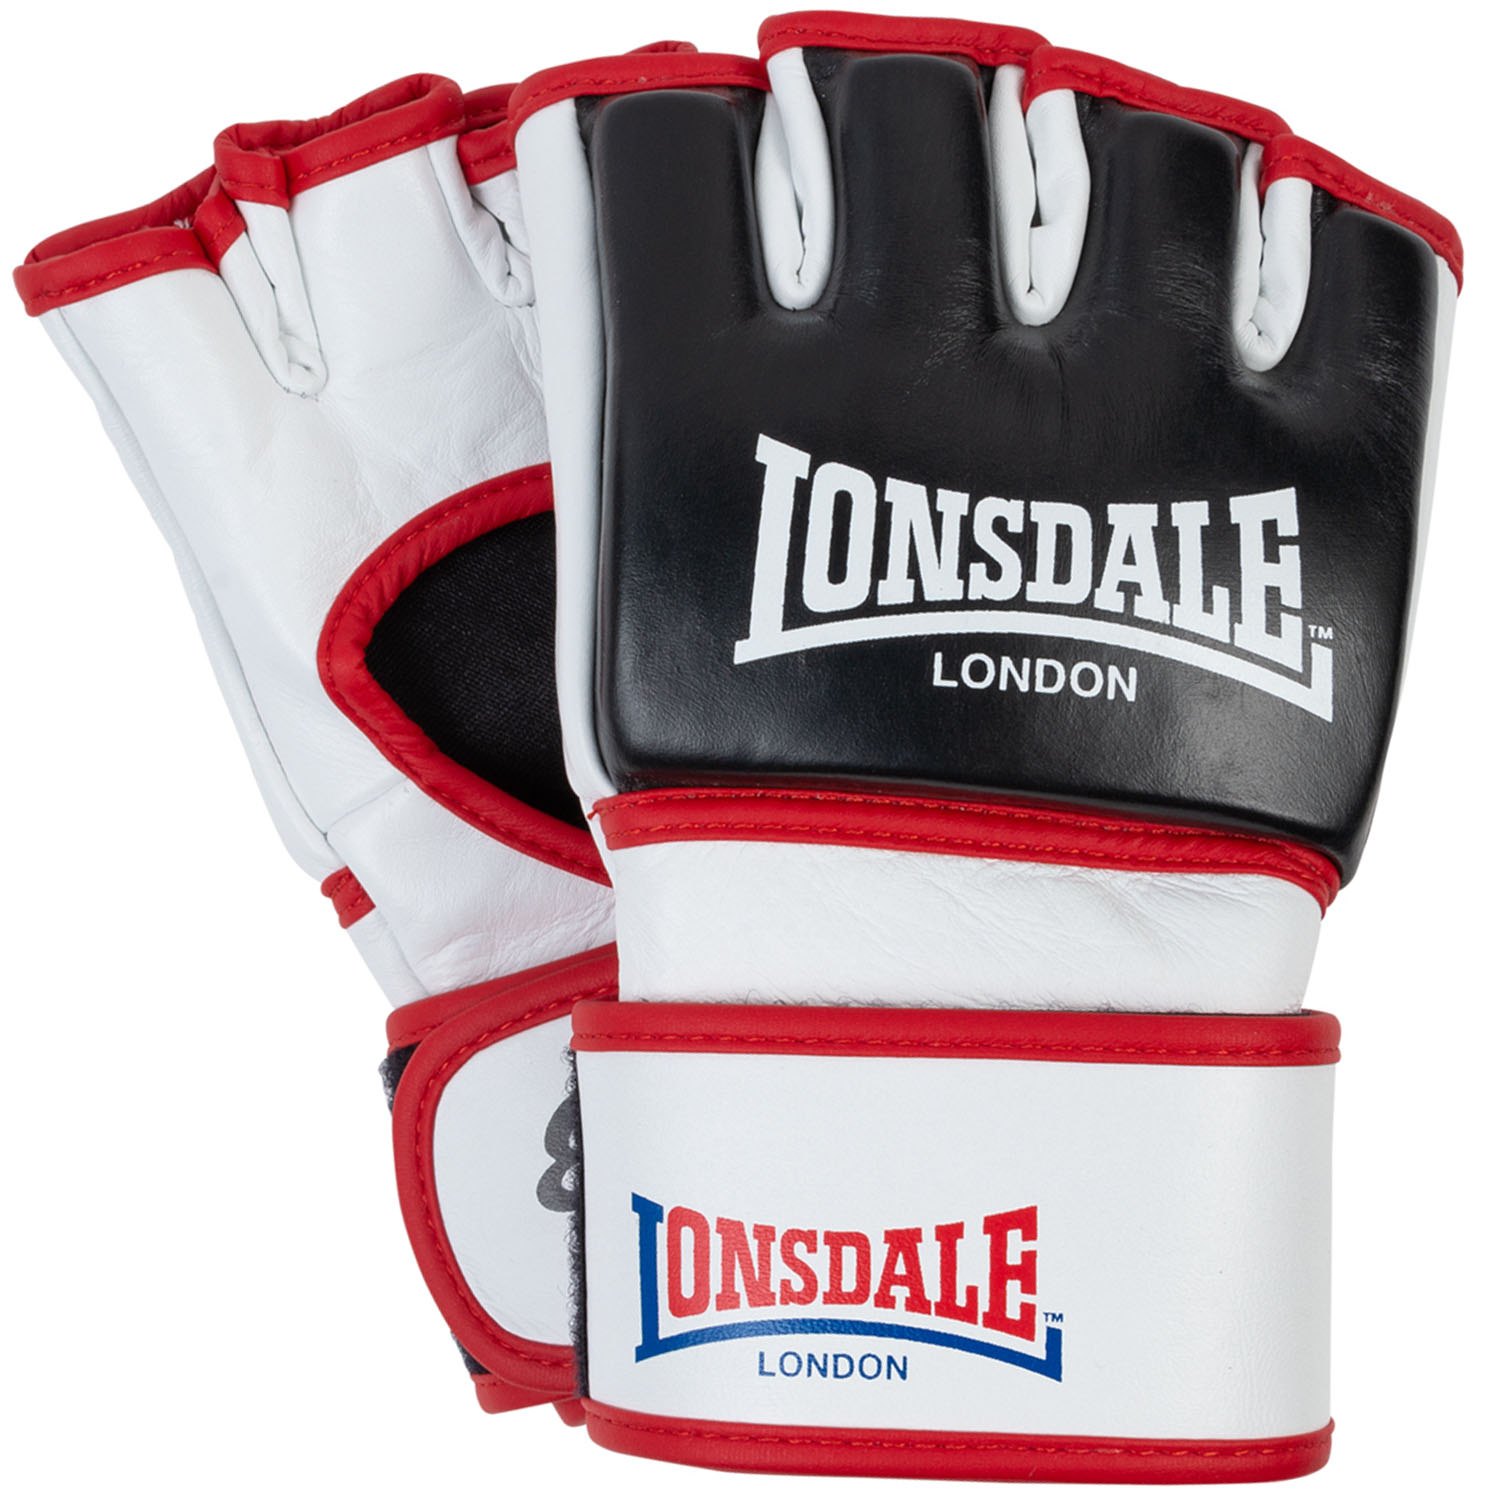 Lonsdale MMA Boxing Gloves, Emory, black-white-red, L